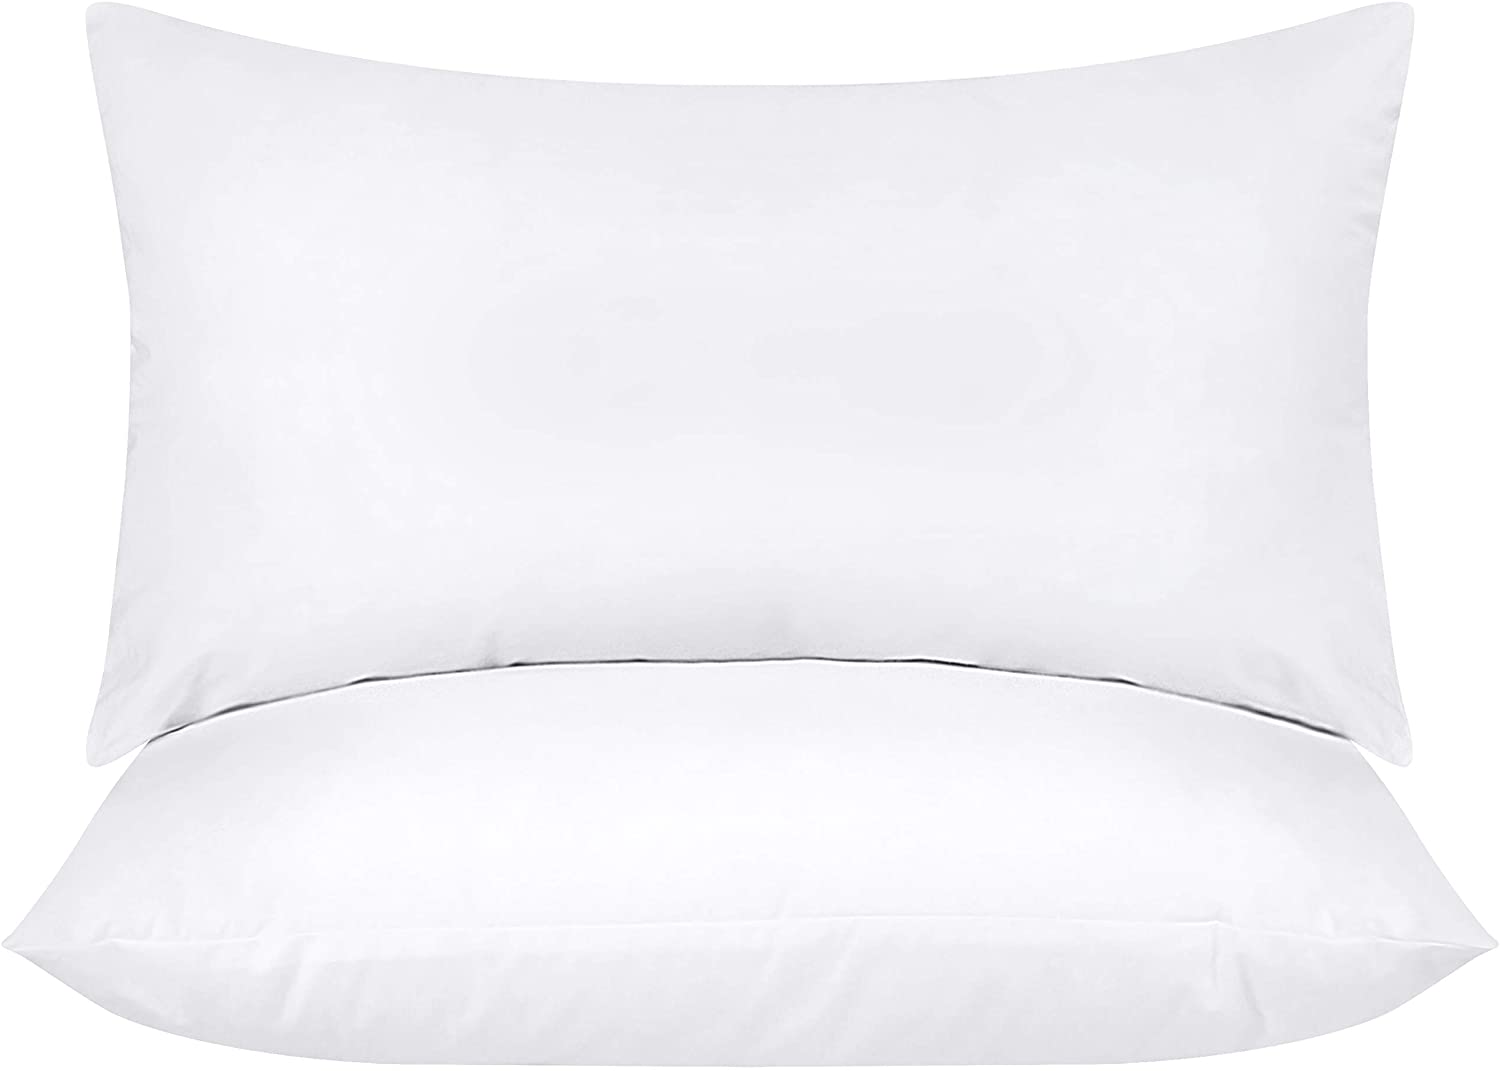 Utopia Bedding Throw Pillows Insert (Pack of 2, White) - 22 x 22 Inches Bed  and Couch Pillows - Indoor Decorative Pillows